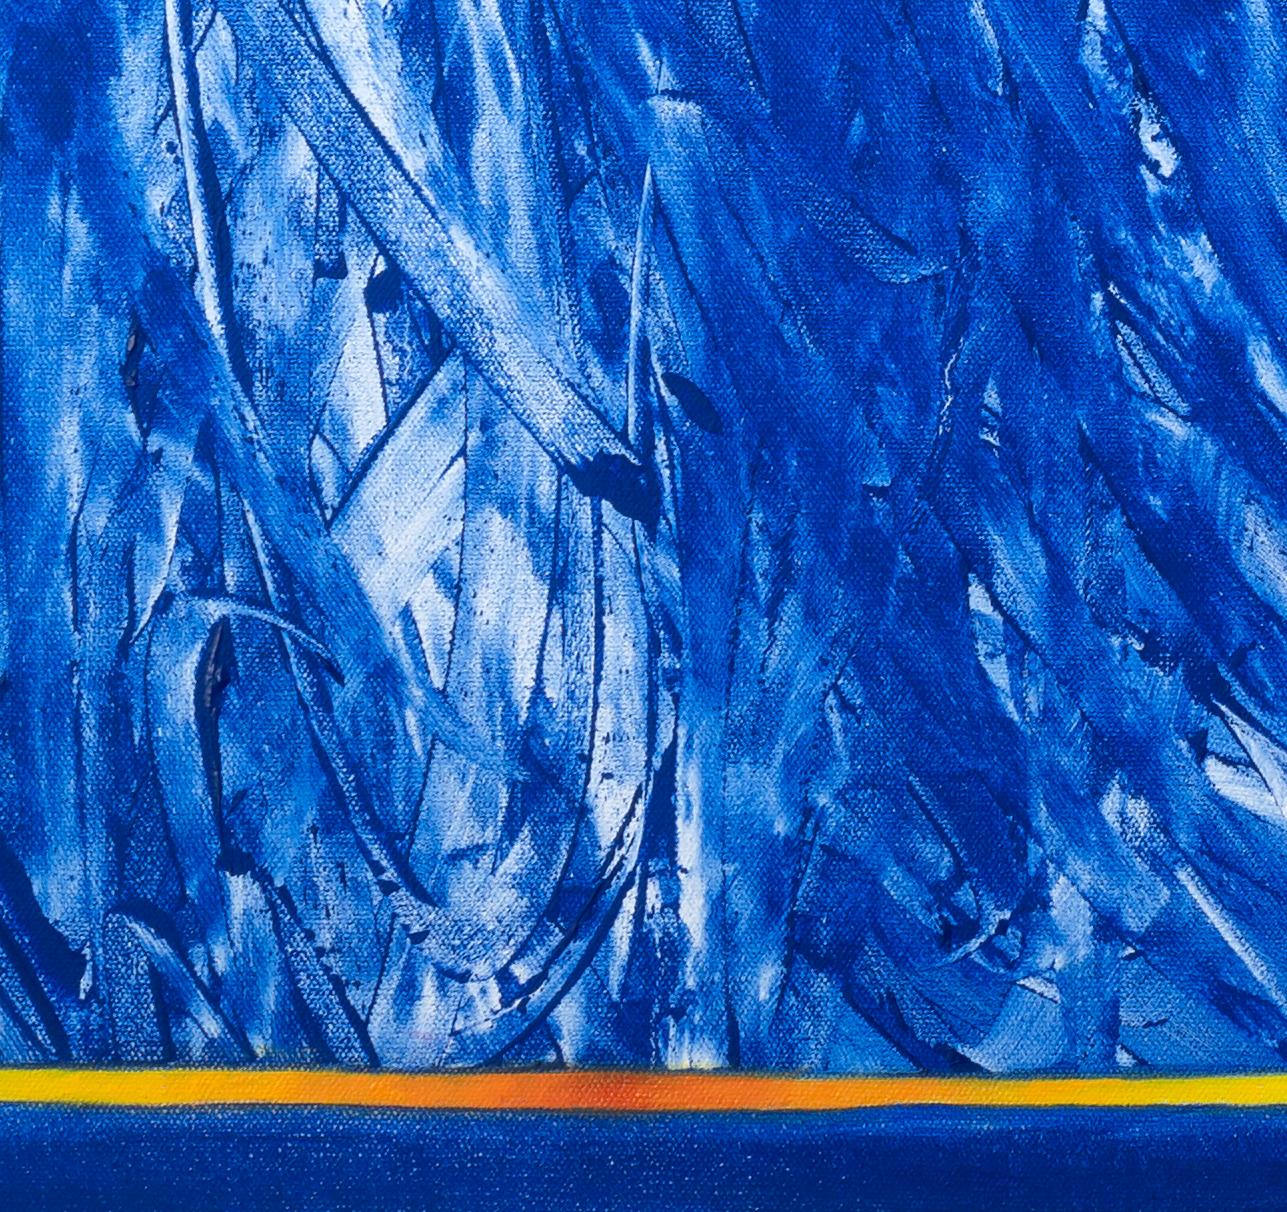 Base -- contemporary abstract oil painting w/ blue & white gestural lines - Abstract Expressionist Painting by Paula Cahill